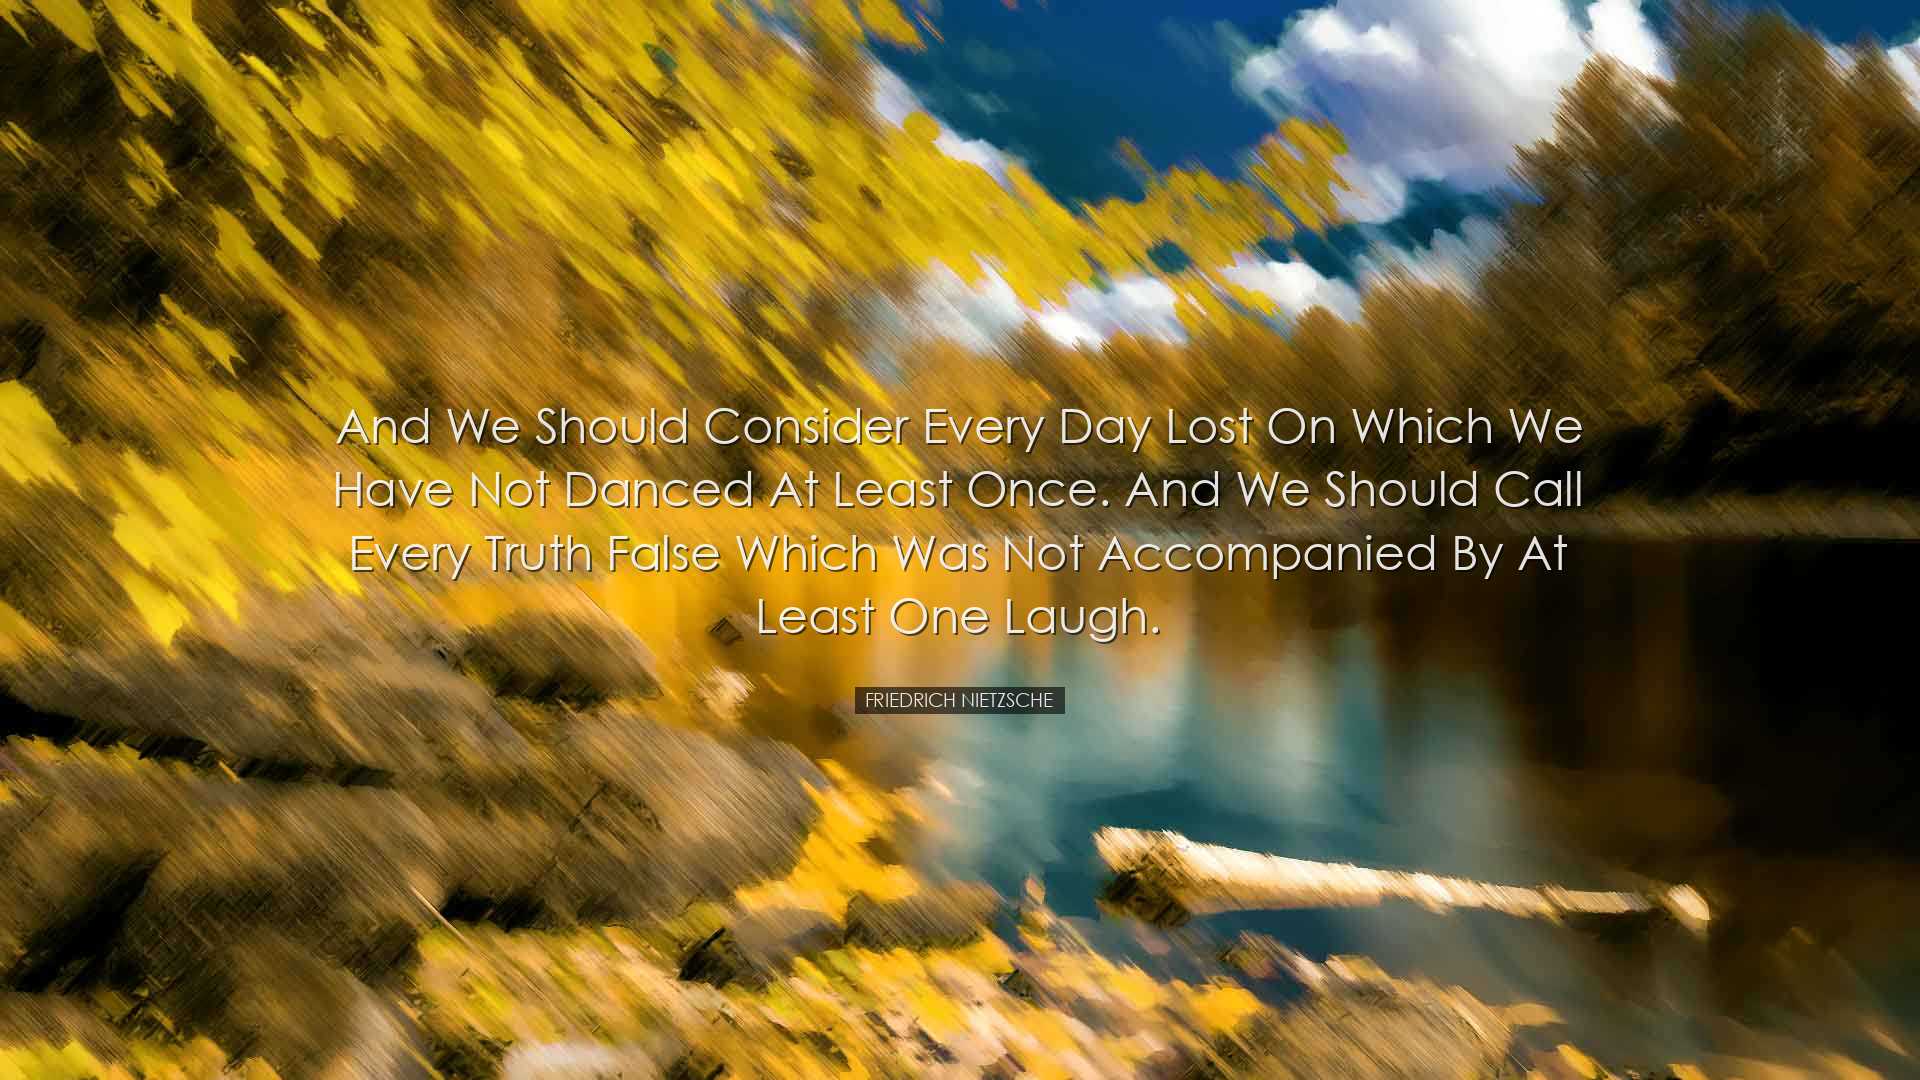 And we should consider every day lost on which we have not danced